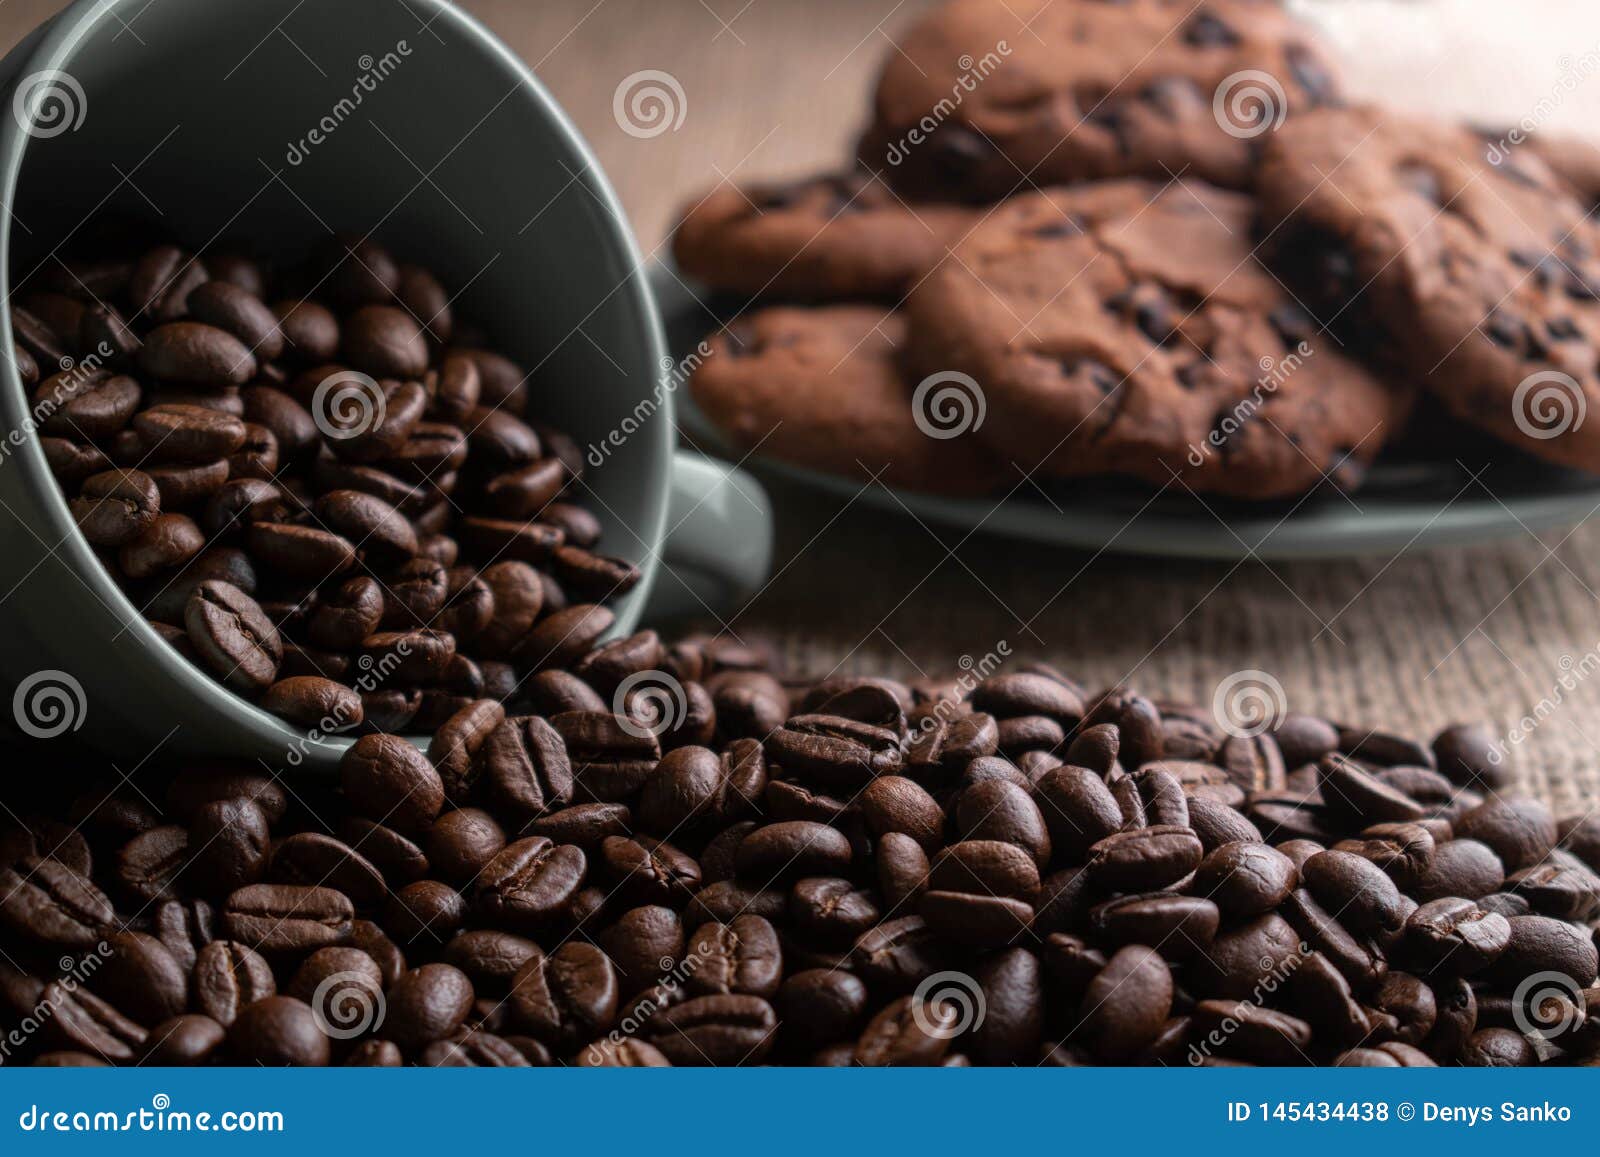 coffee beans crumbled with a cup, in the background a plate of cookies